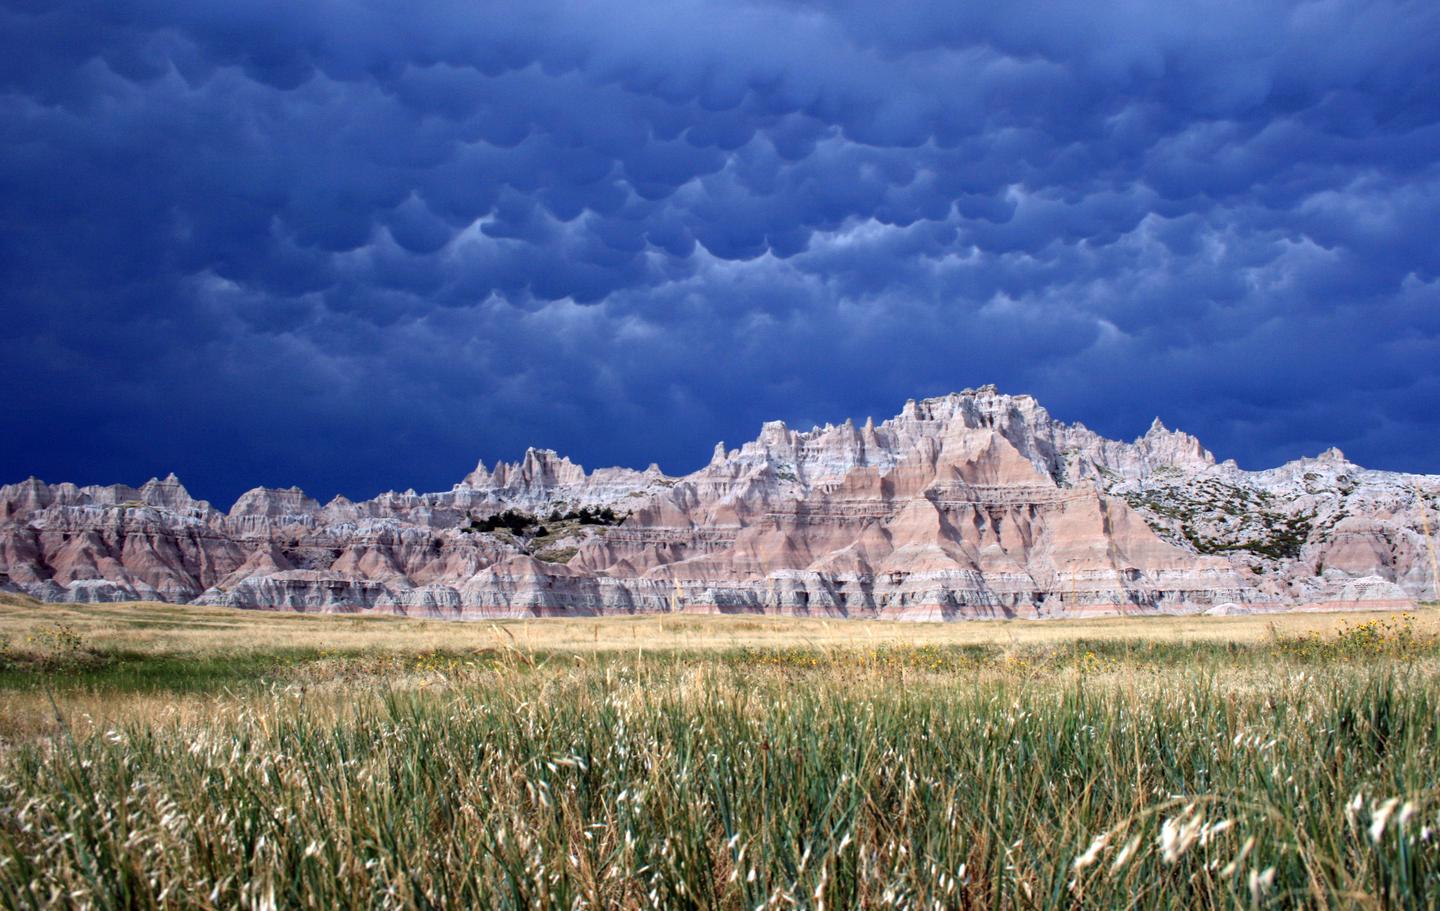 Preview photo of Badlands National Park